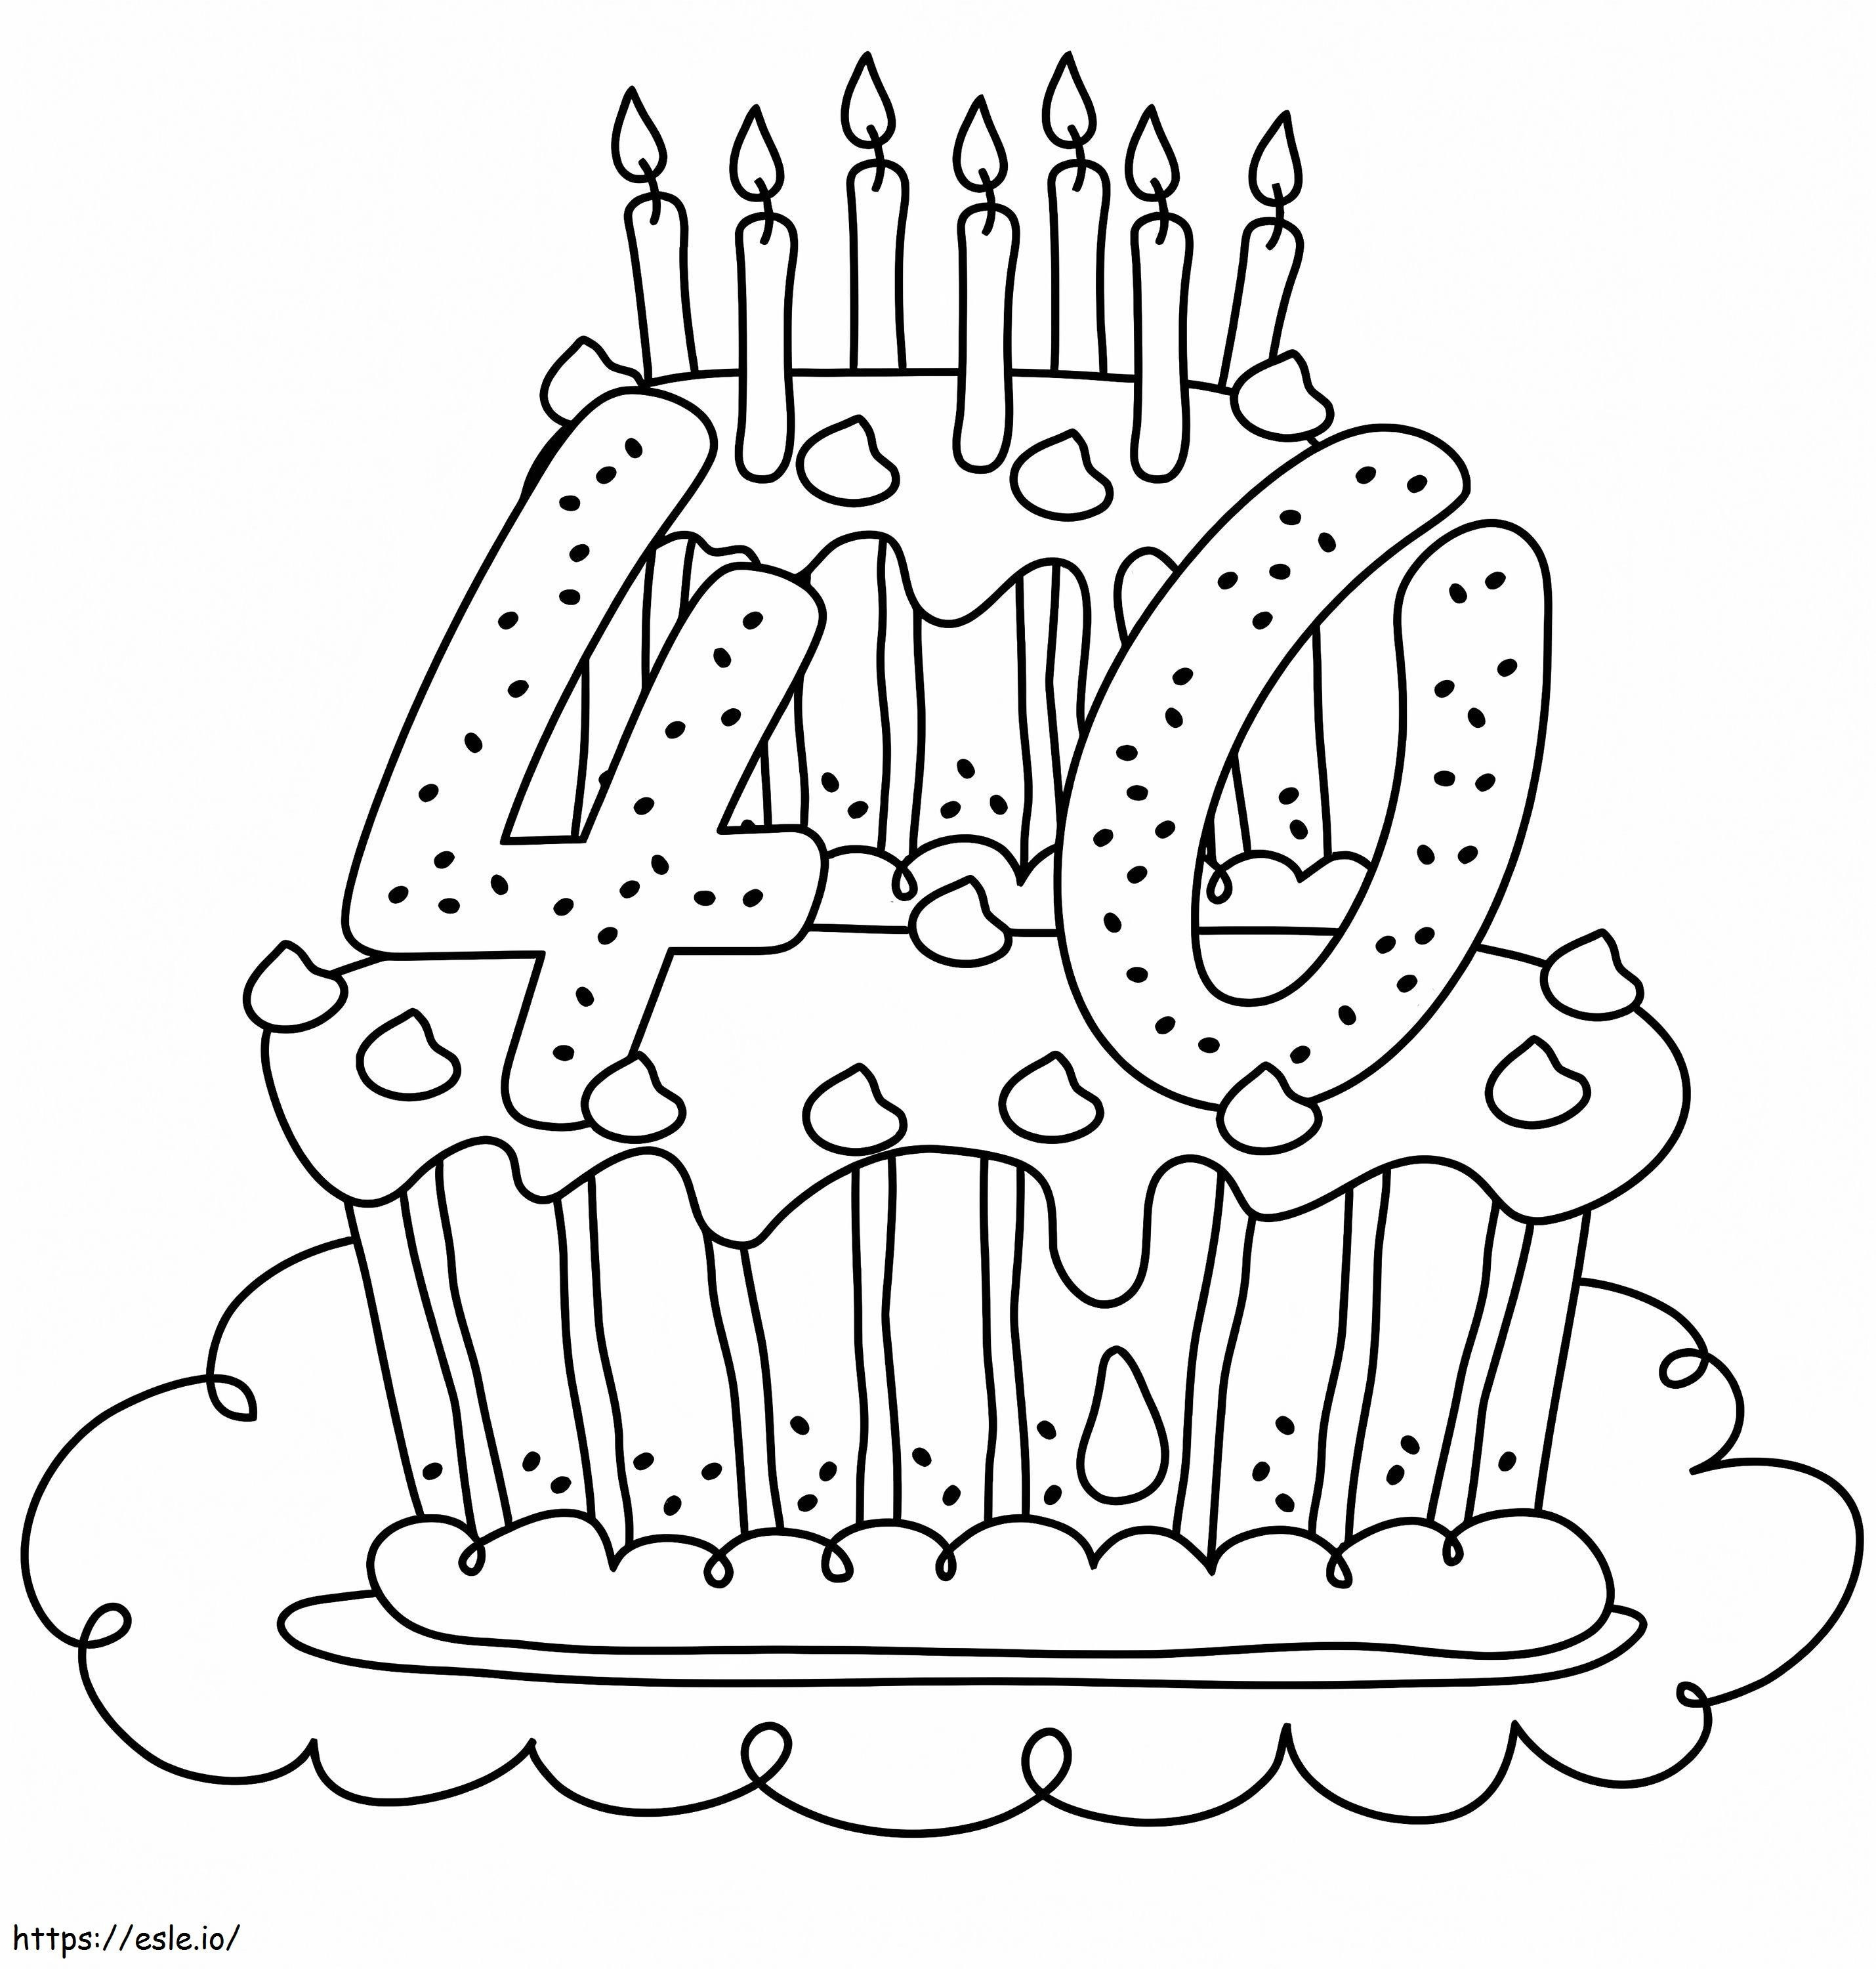 Years Old Birthday Cake coloring page